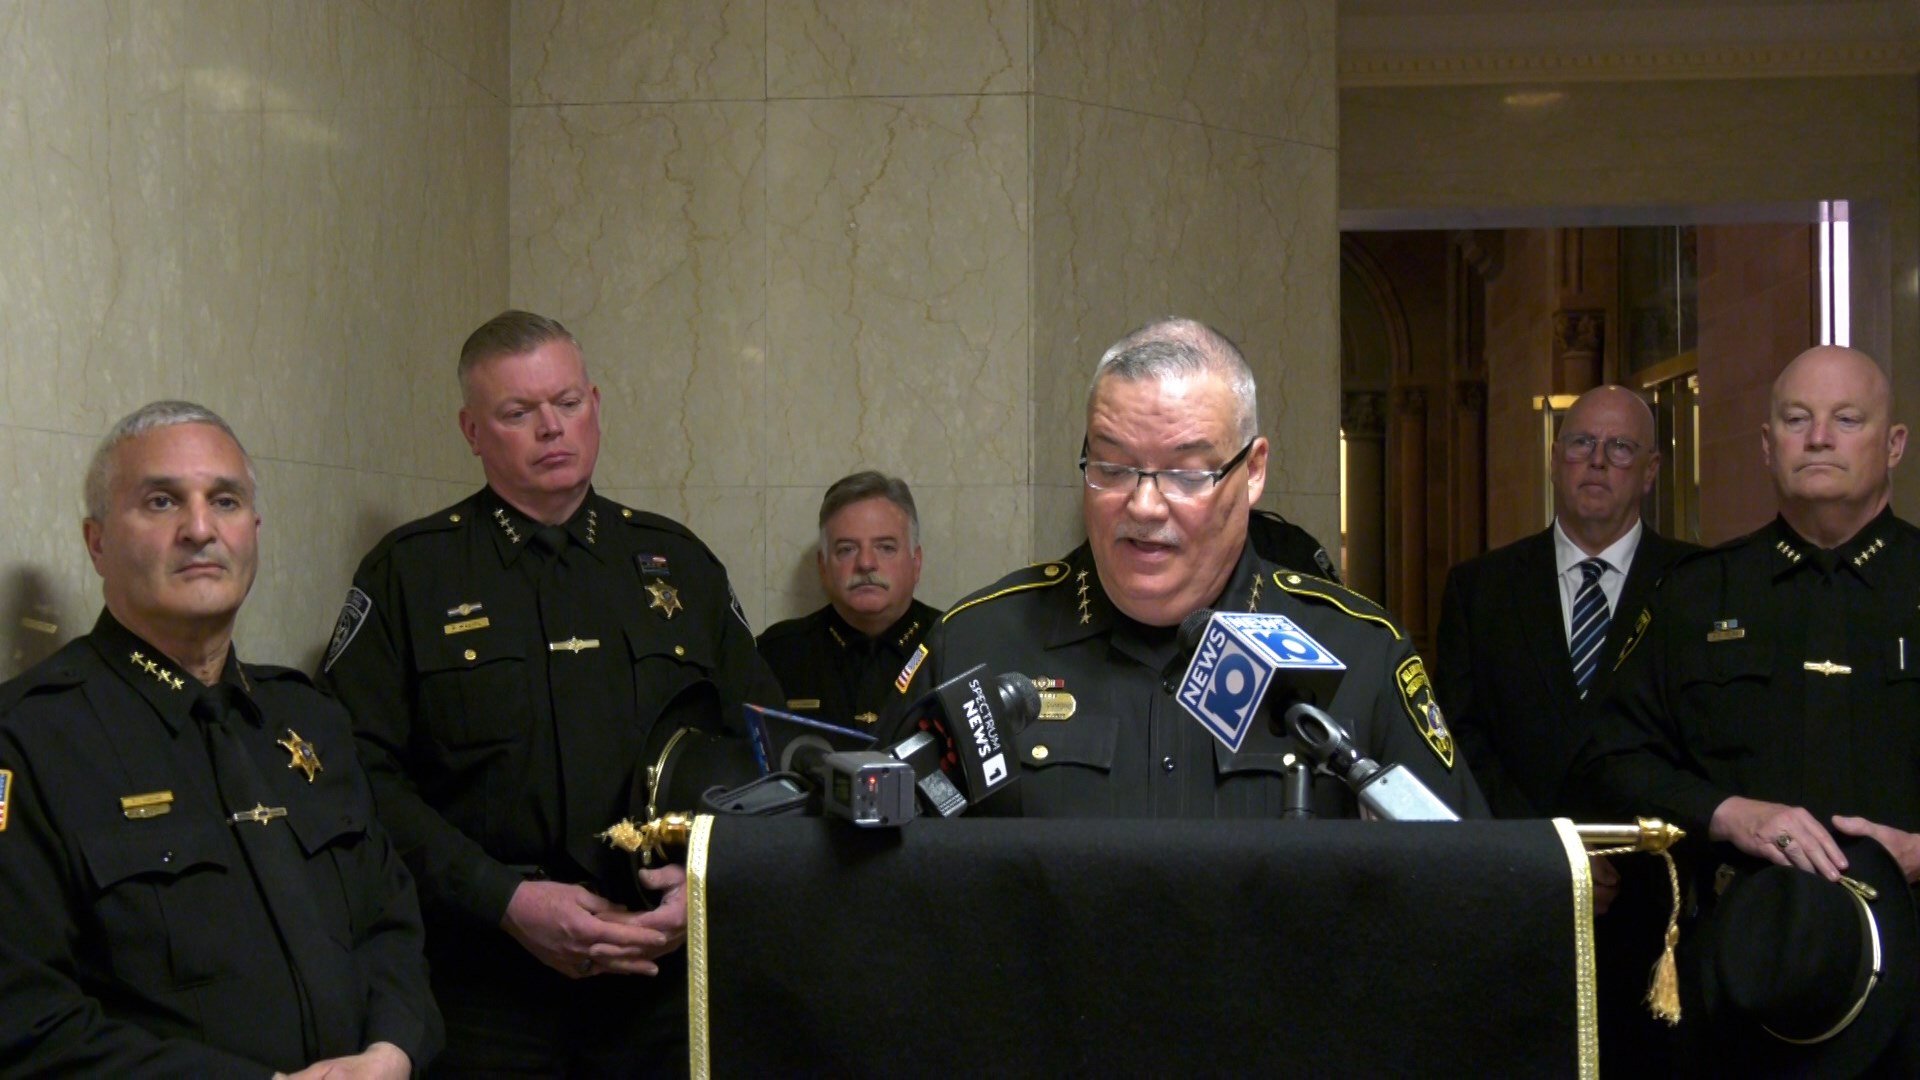 County Sheriff's raise concern about recent officer deaths